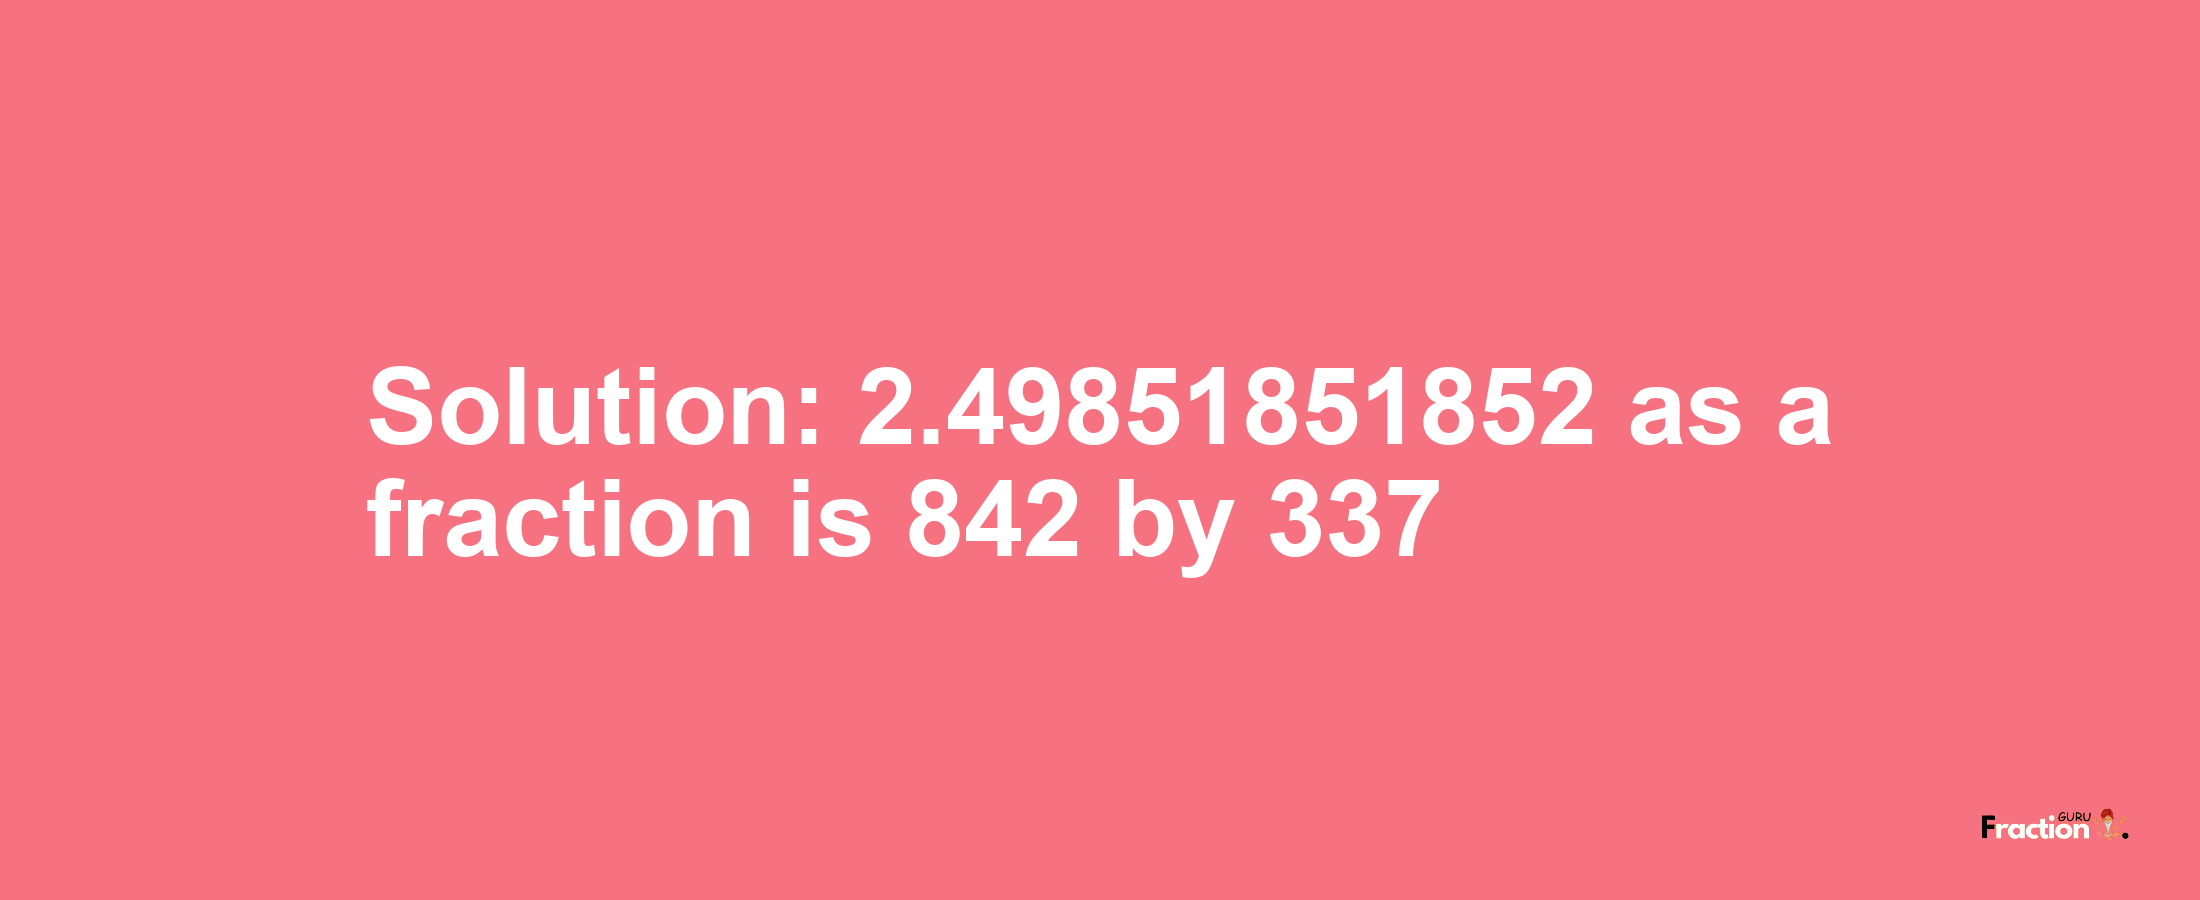 Solution:2.49851851852 as a fraction is 842/337